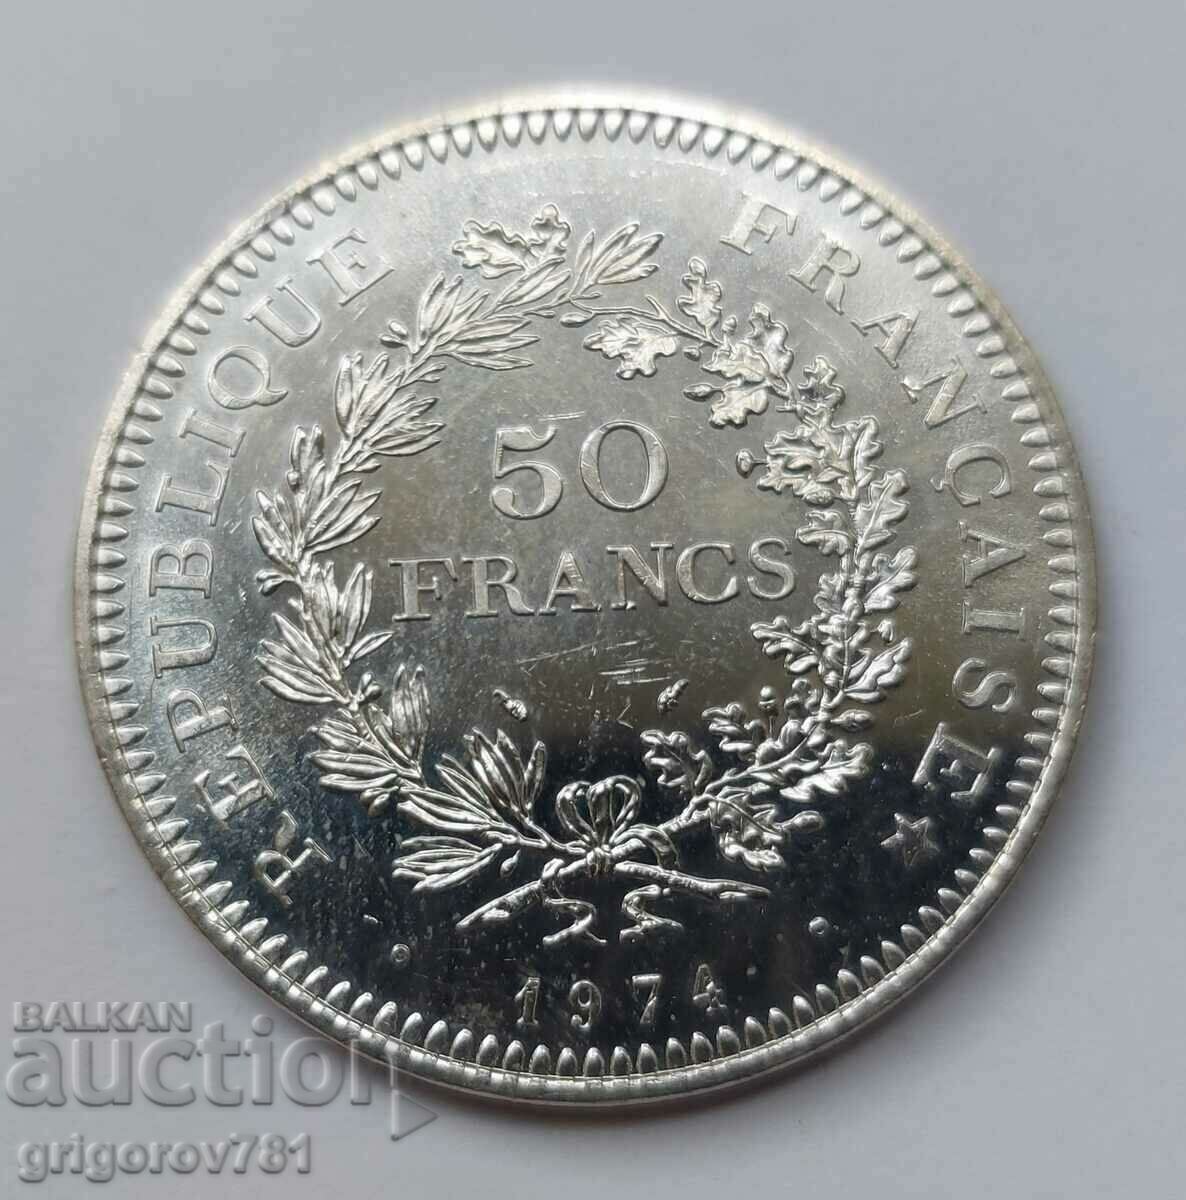 50 Francs Silver France 1974 - Silver Coin #8